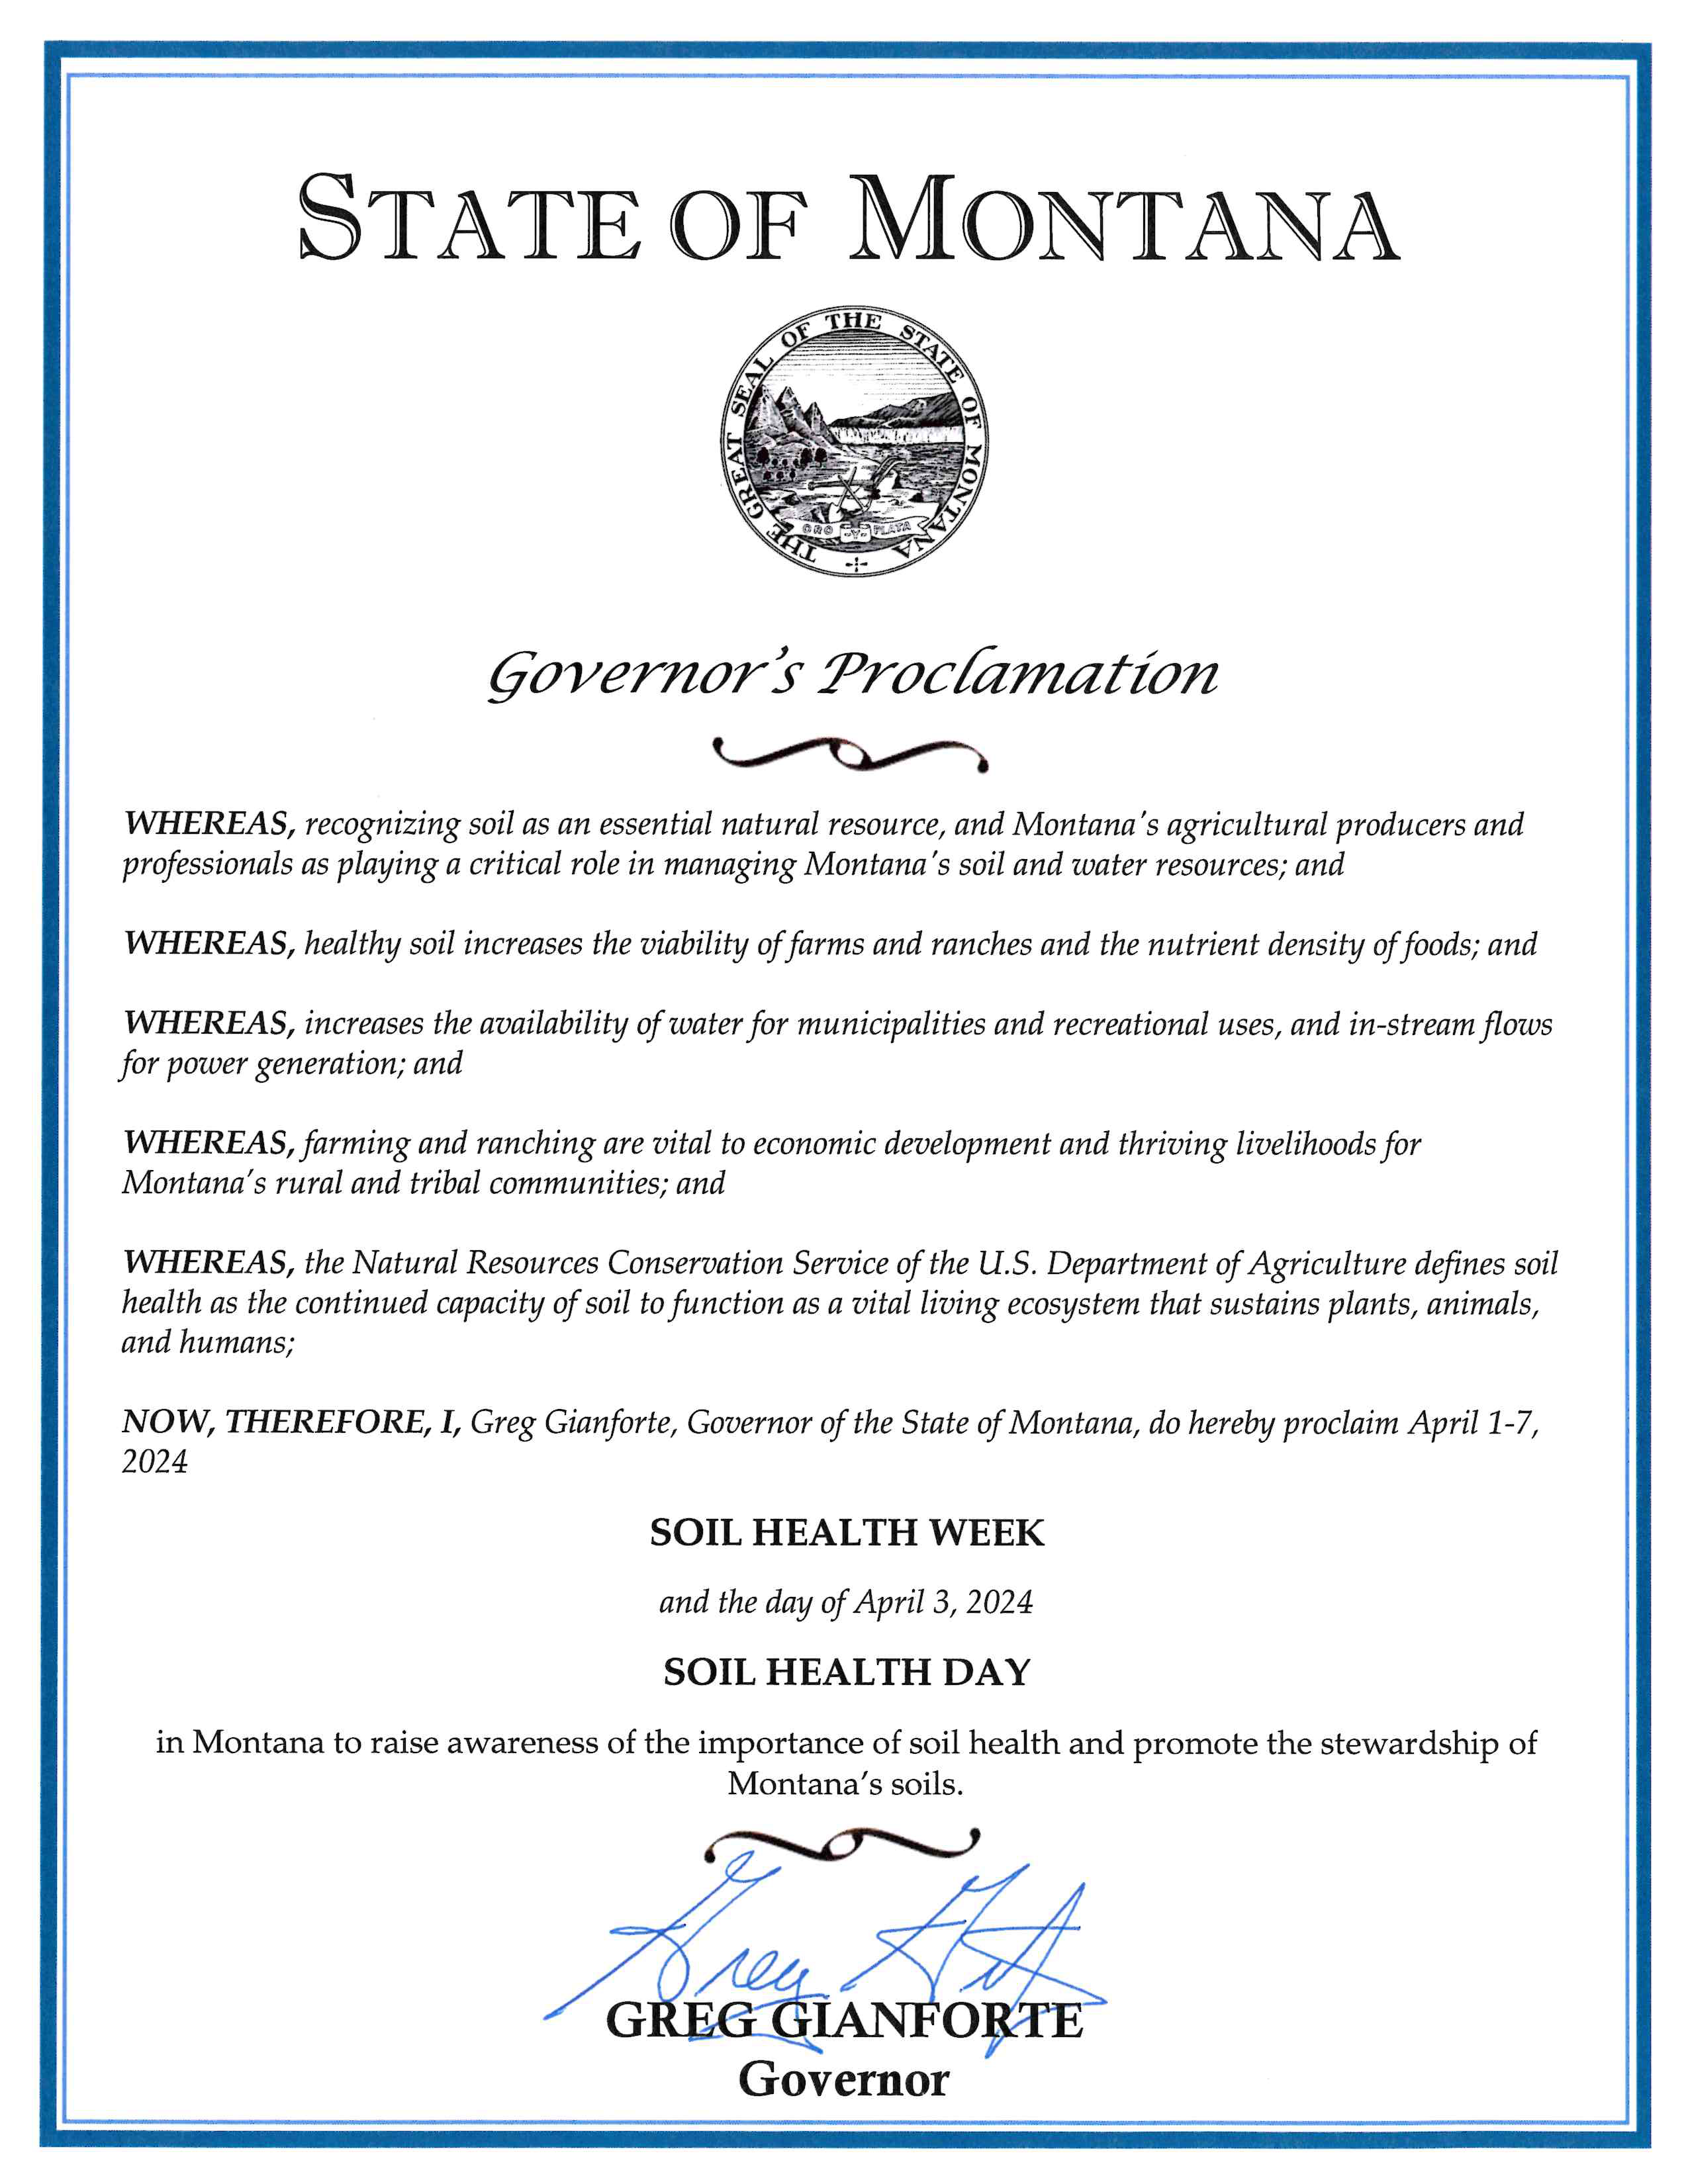 Governor Gianforte Proclamation Soil Health Week - WHEREAS, recognizing soil as an essential natural resource, and Montana's agricultural producers and professionals as playing a critical role in managing Montana's soil and water resources; and  WHEREAS, healthy soil increases the viability of farms and ranches and the nutrient density of foods; and  WHEREAS, increases the availability of water for municipalities and recreational uses, and in-stream flows for power generation; and  WHEREAS, farming and ranching are vital to economic development and thriving livelihoods for Montana's rural and tribal communities; and  WHEREAS, the Natural Resources Conservation Service of the U.S. Department of Agriculture defines soil health as the continued capacity of soil to function as a vital living ecosystem that sustains plants, animals, and humans;  NOW, THEREFORE, I, Greg Gianforte, Governor of the State of Montana, do hereby proclaim April 1-7, 2024  SOIL HEALTH WEEK  and the day of April 3, 2024  SOIL HEALTH DAY  in Montana to raise awareness of the importance of soil health and promote the stewardship of Montana's soils. 